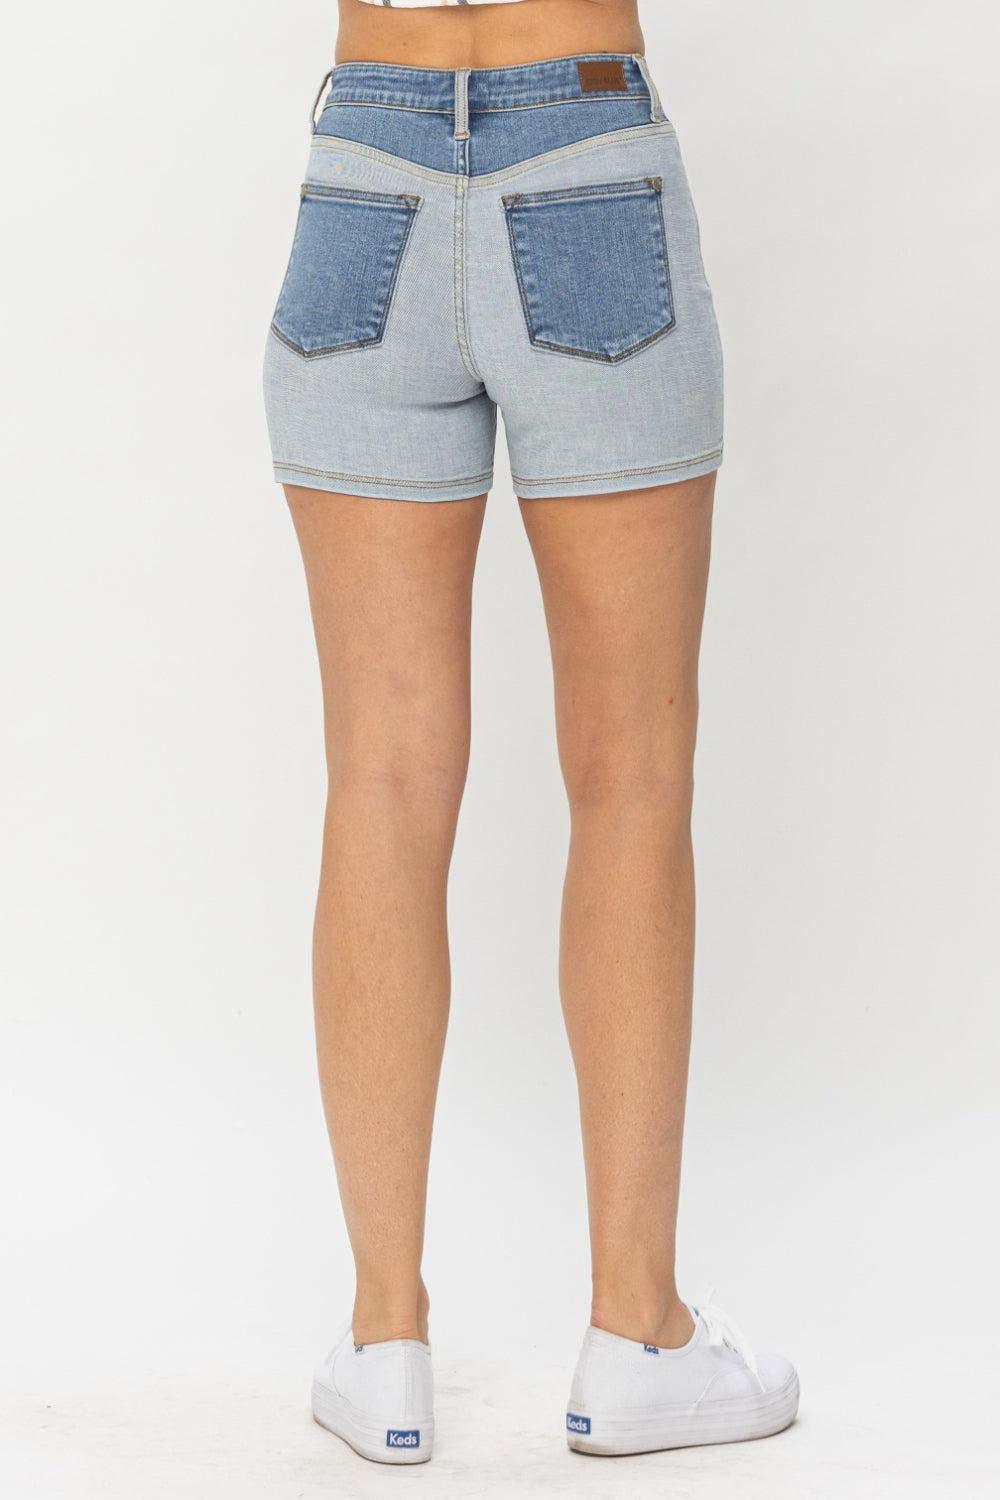 the back of a woman's jeans shorts